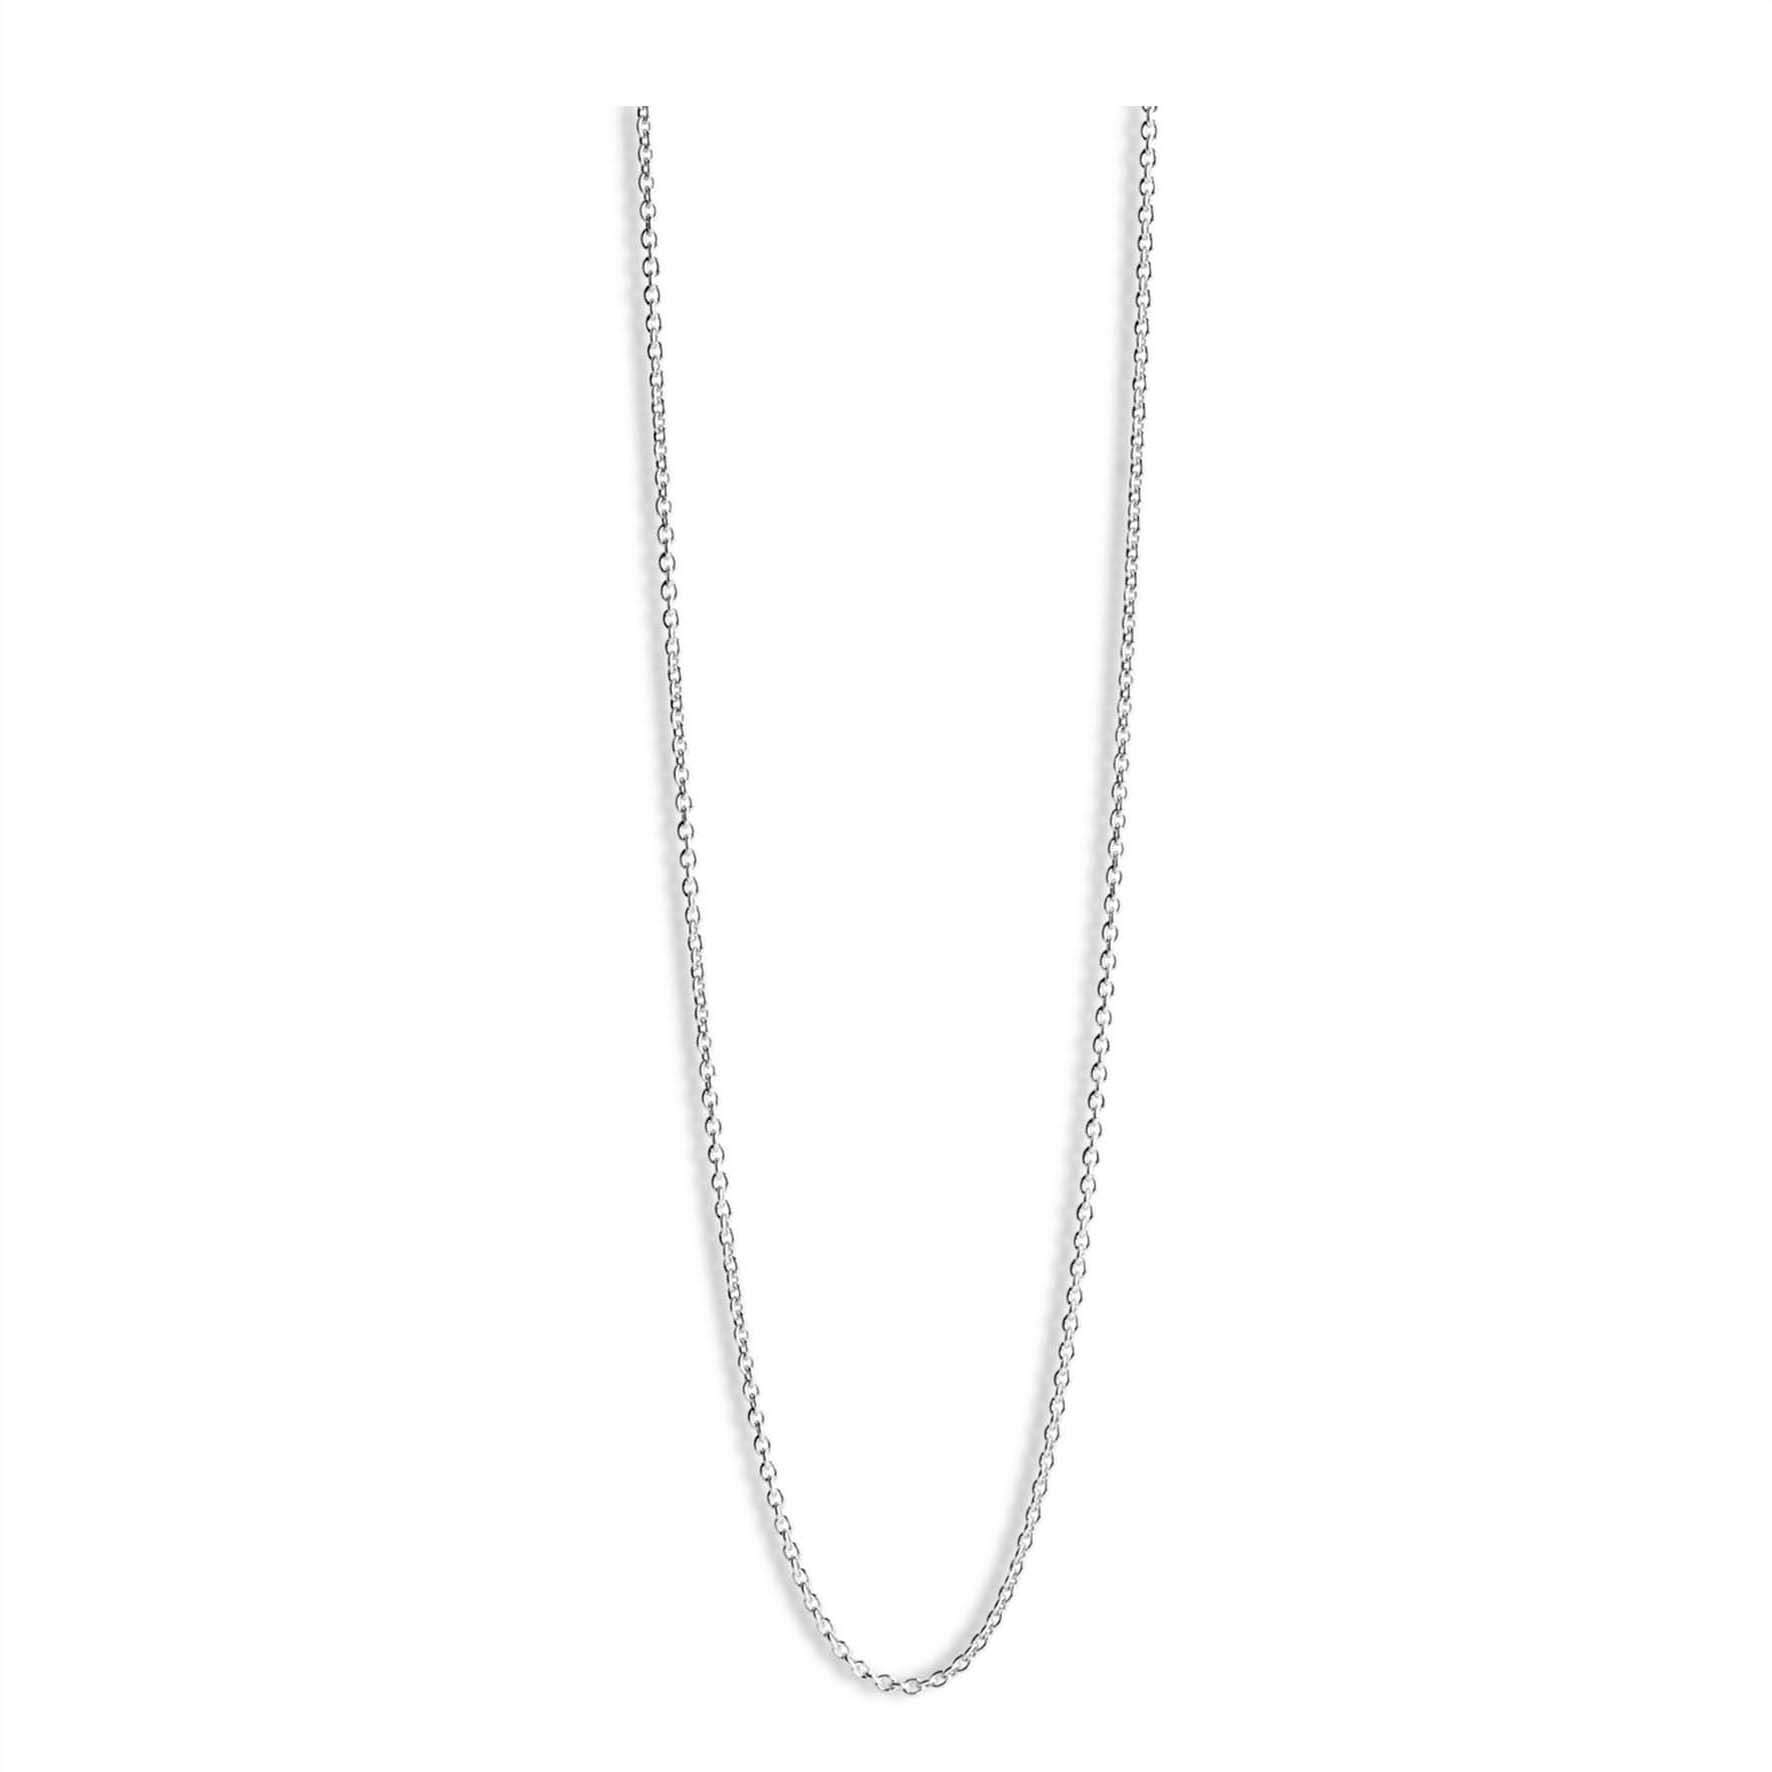 Anchor Chain Necklace from Jane Kønig in Silver Sterling 925|Matt